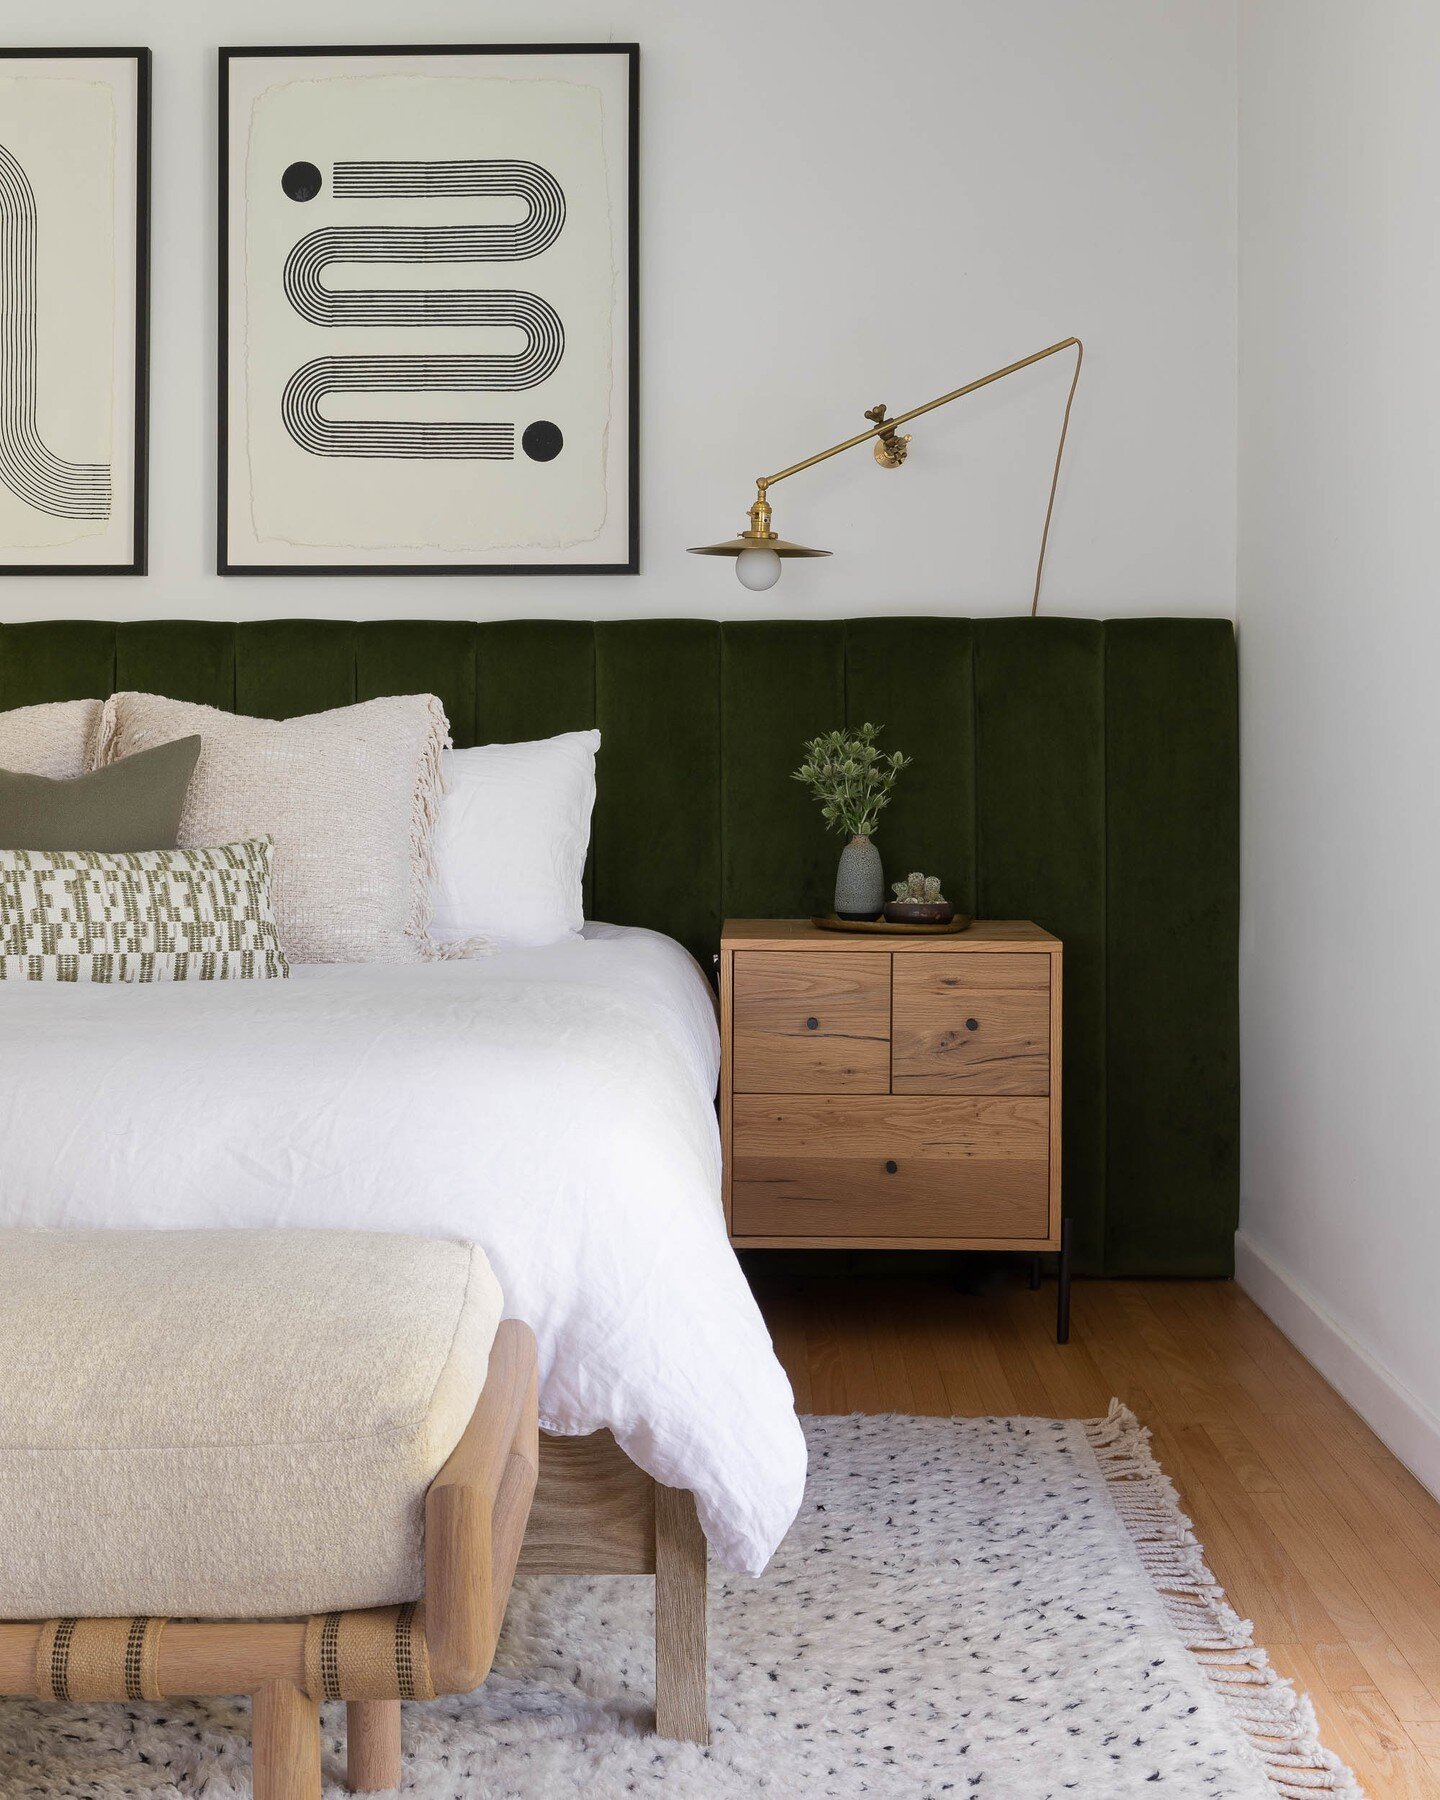 A bedroom that inspires clarity and zen. ⠀⁣⁣
⠀⁣⁣
If there's one place to spend energy creating a zen, minimal environment, it's your bedroom. As the place you begin and end each day, prioritize cleansing the space of any excess clutter and focus on k